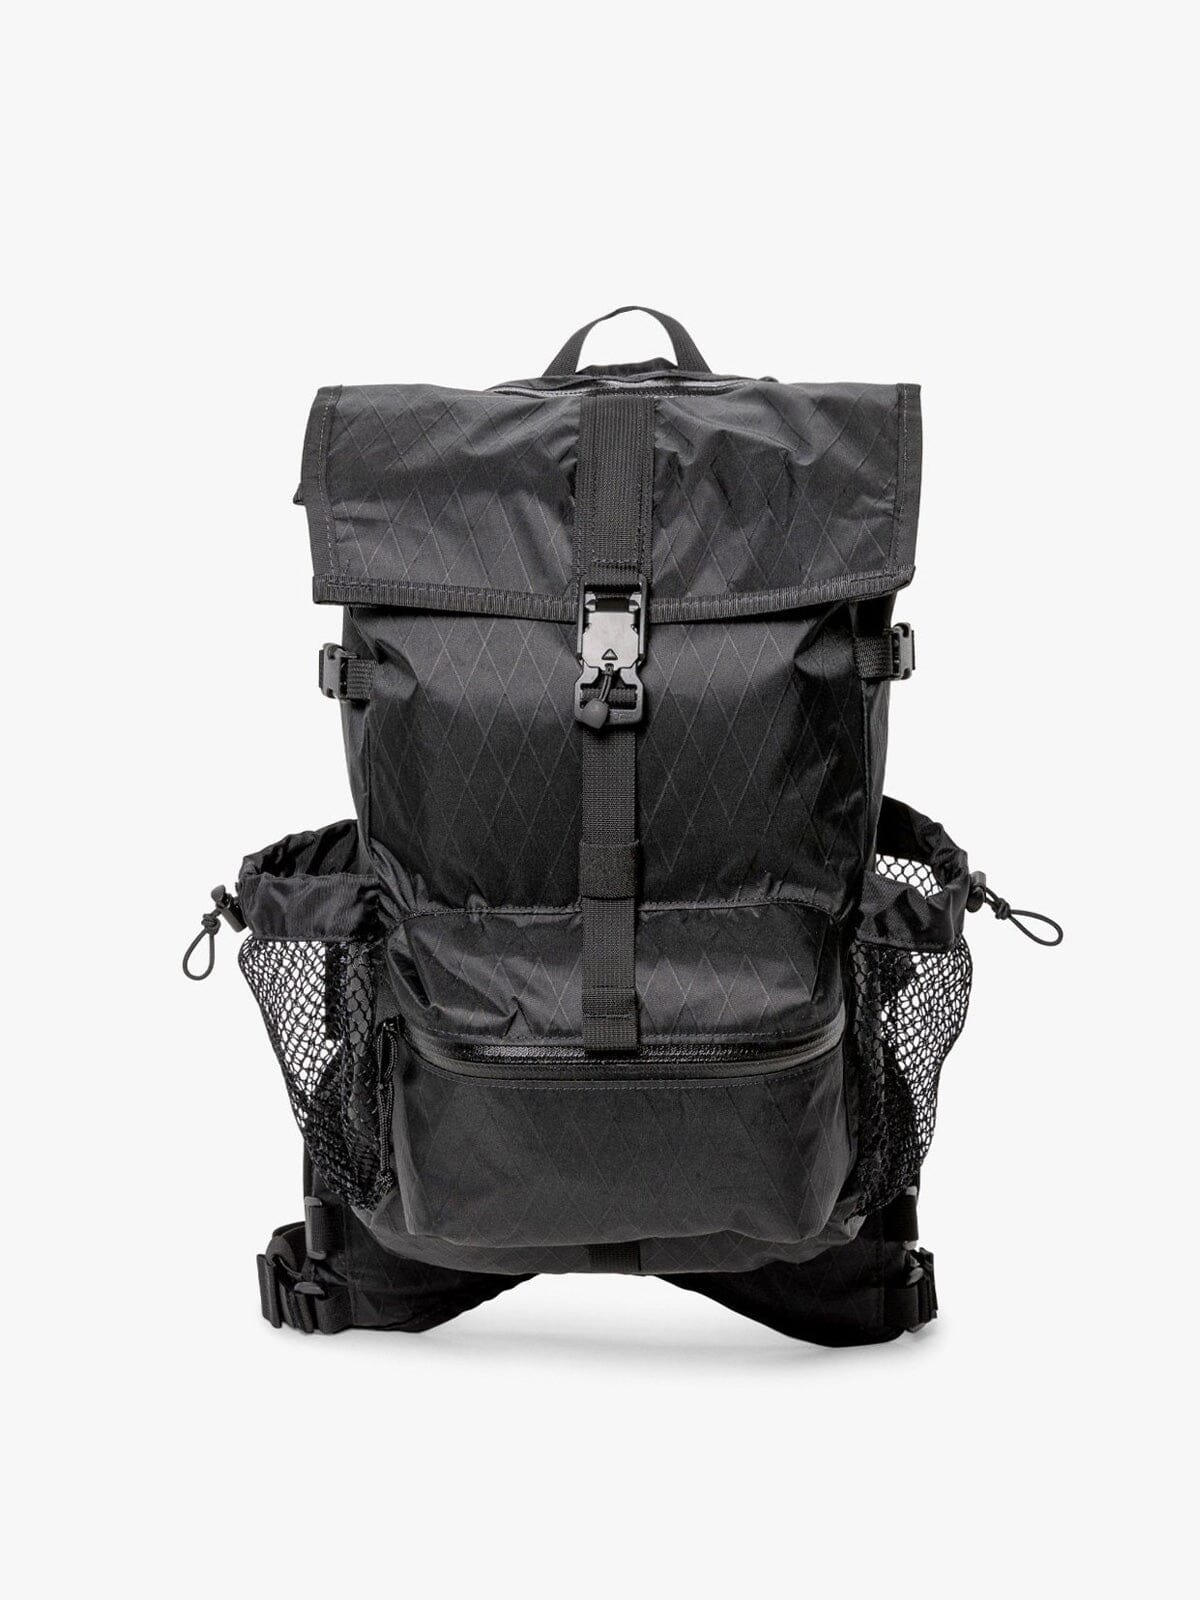 Speedwell by Mission Workshop - Weatherproof Bags & Technical Apparel - San Francisco & Los Angeles - Built to endure - Guaranteed forever